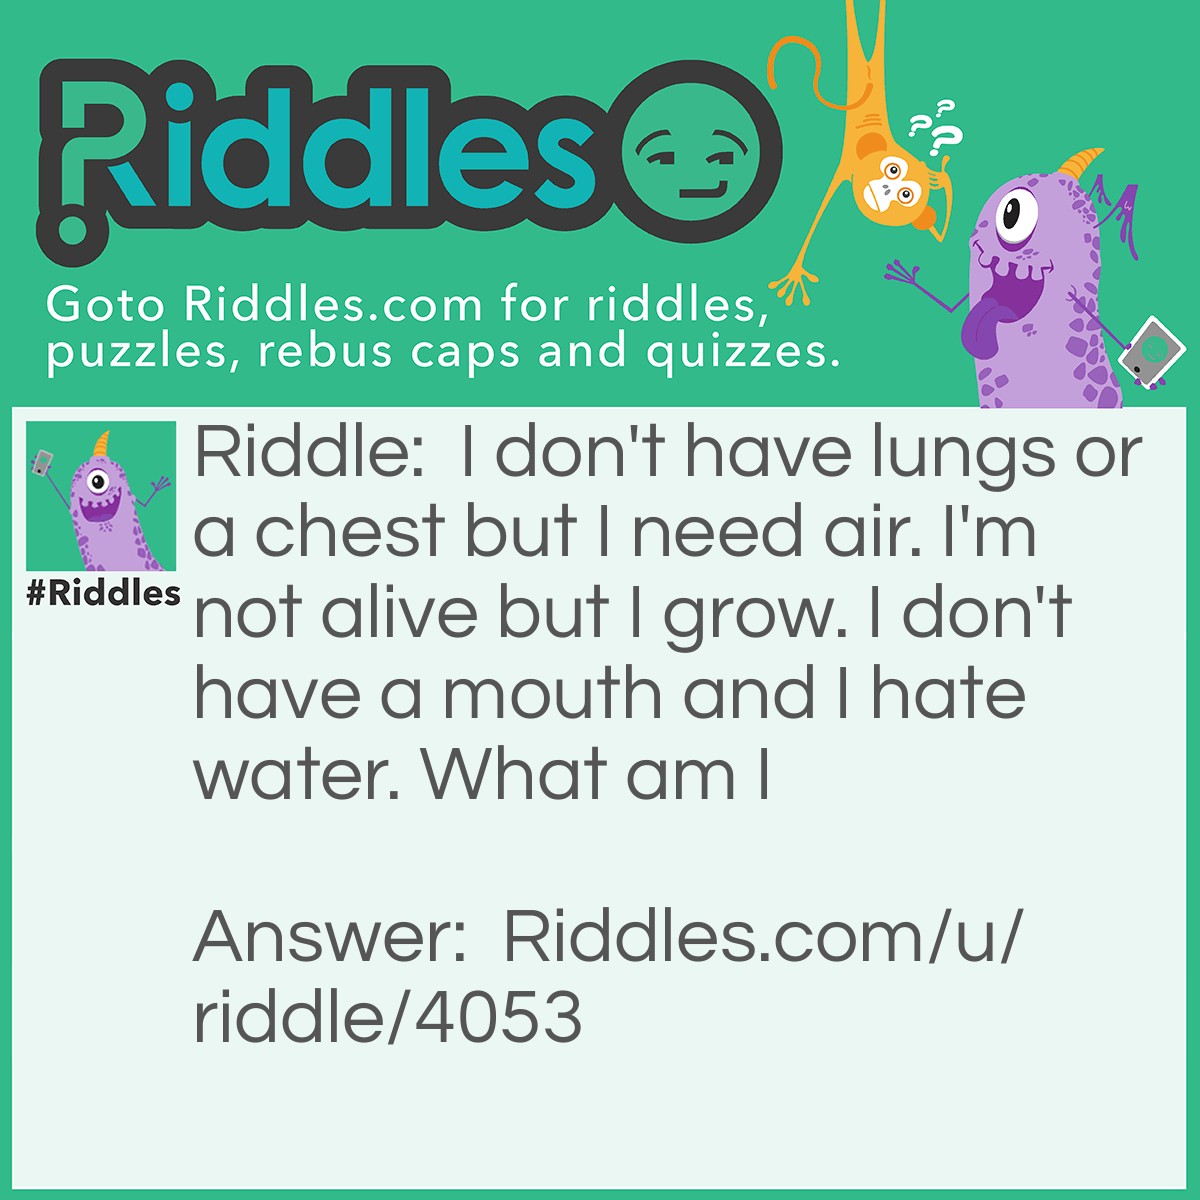 Riddle: I don't have lungs or a chest but I need air. I'm not alive but I grow. I don't have a mouth and I hate water. What am I Answer: Fire.